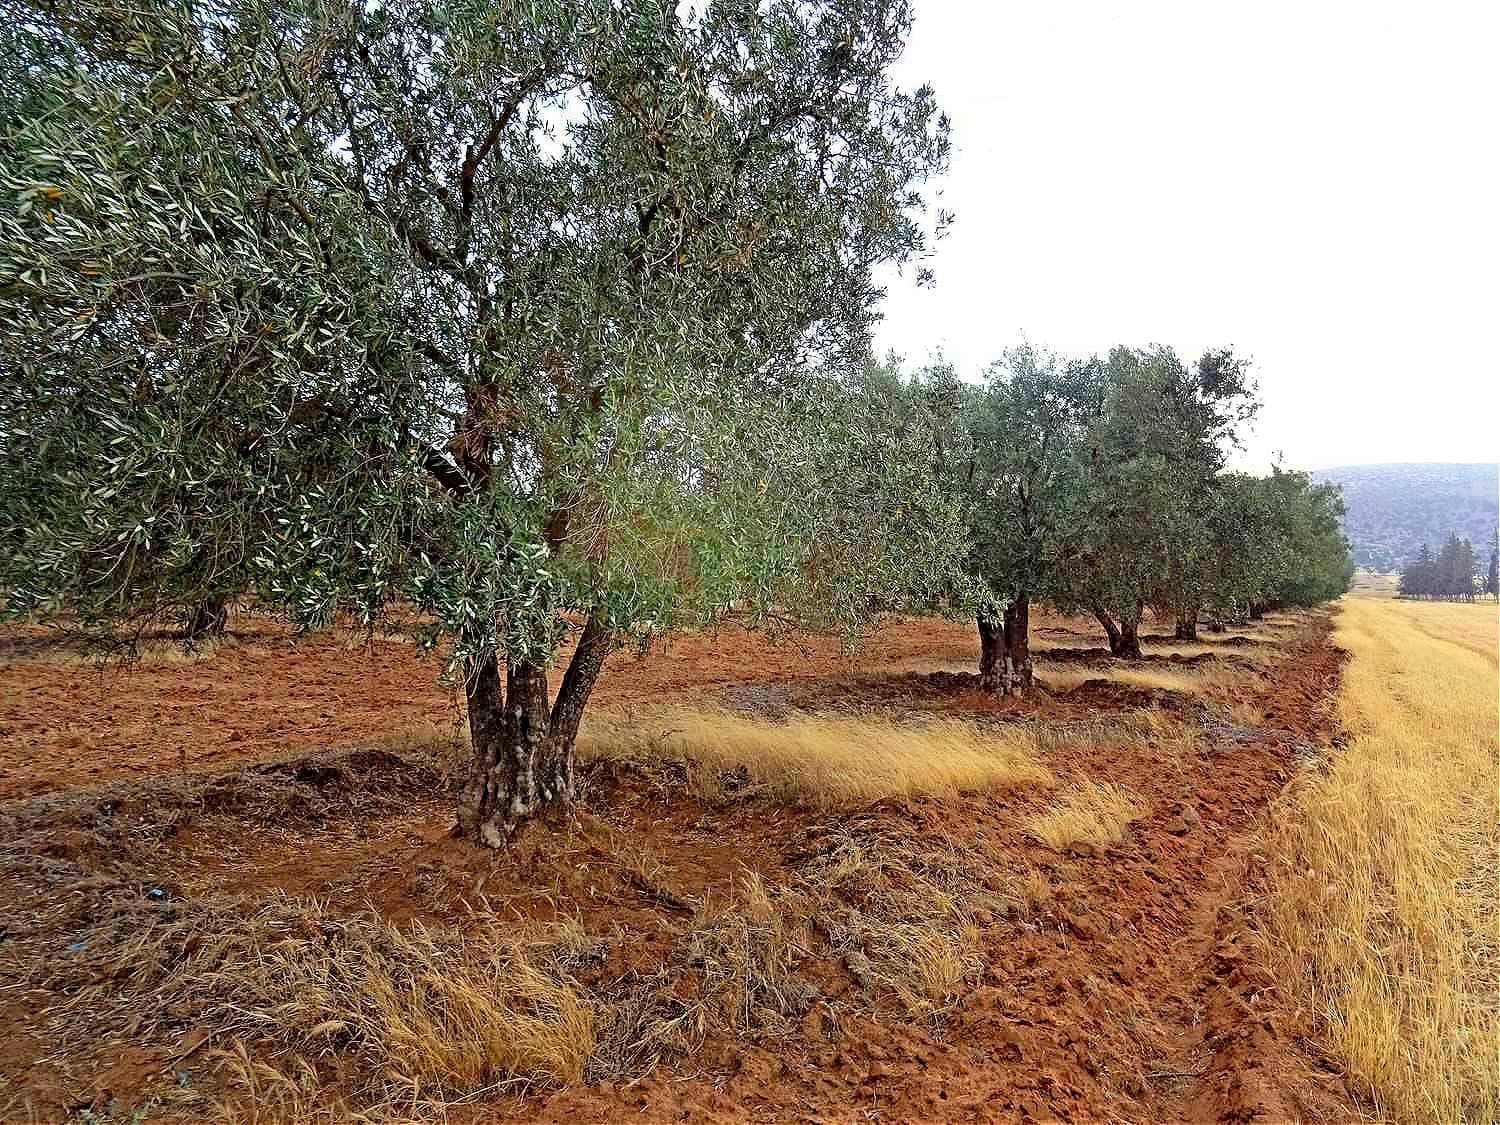 africa-middle-east-business-in-bid-to-boost-exports-algeria-plants-millions-of-olive-trees-olive-oil-times